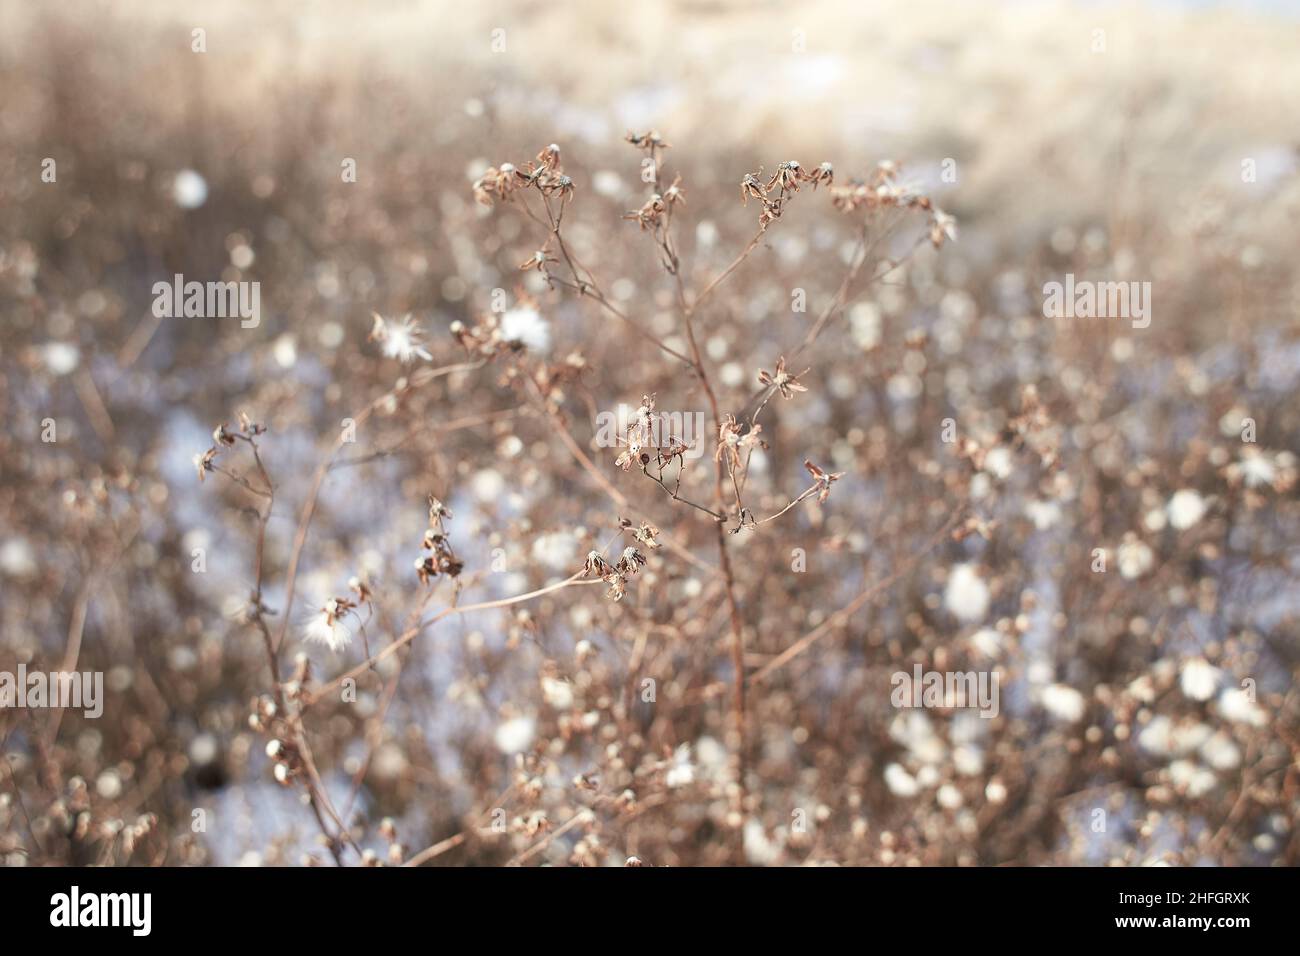 Tiny white flowers on dry twigs of wild plant bushes with blurry background. Bunches of small white seeds on thin branches. dried bushes in winter. se Stock Photo